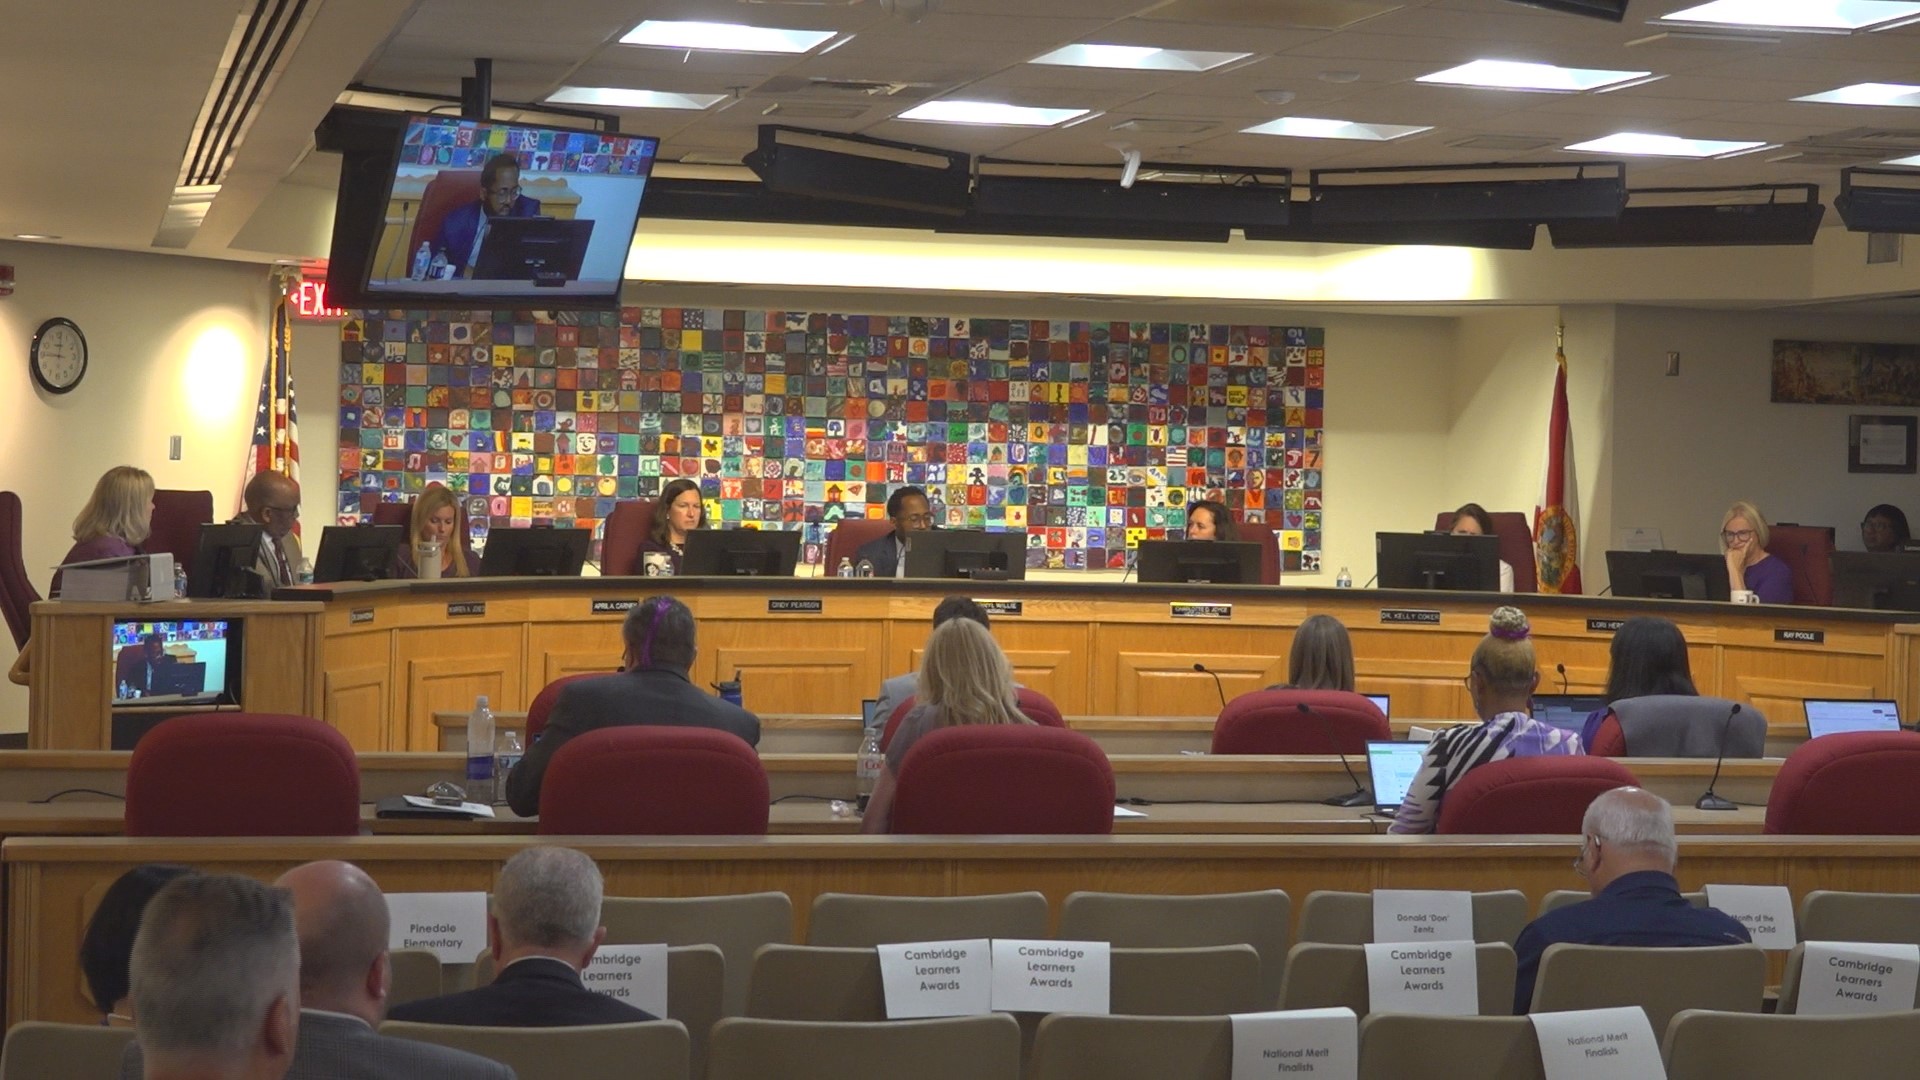 Board member Warren Jones said the new start date will give parents enough time to decide if they want their kids to attend the new consolidated magnet school.